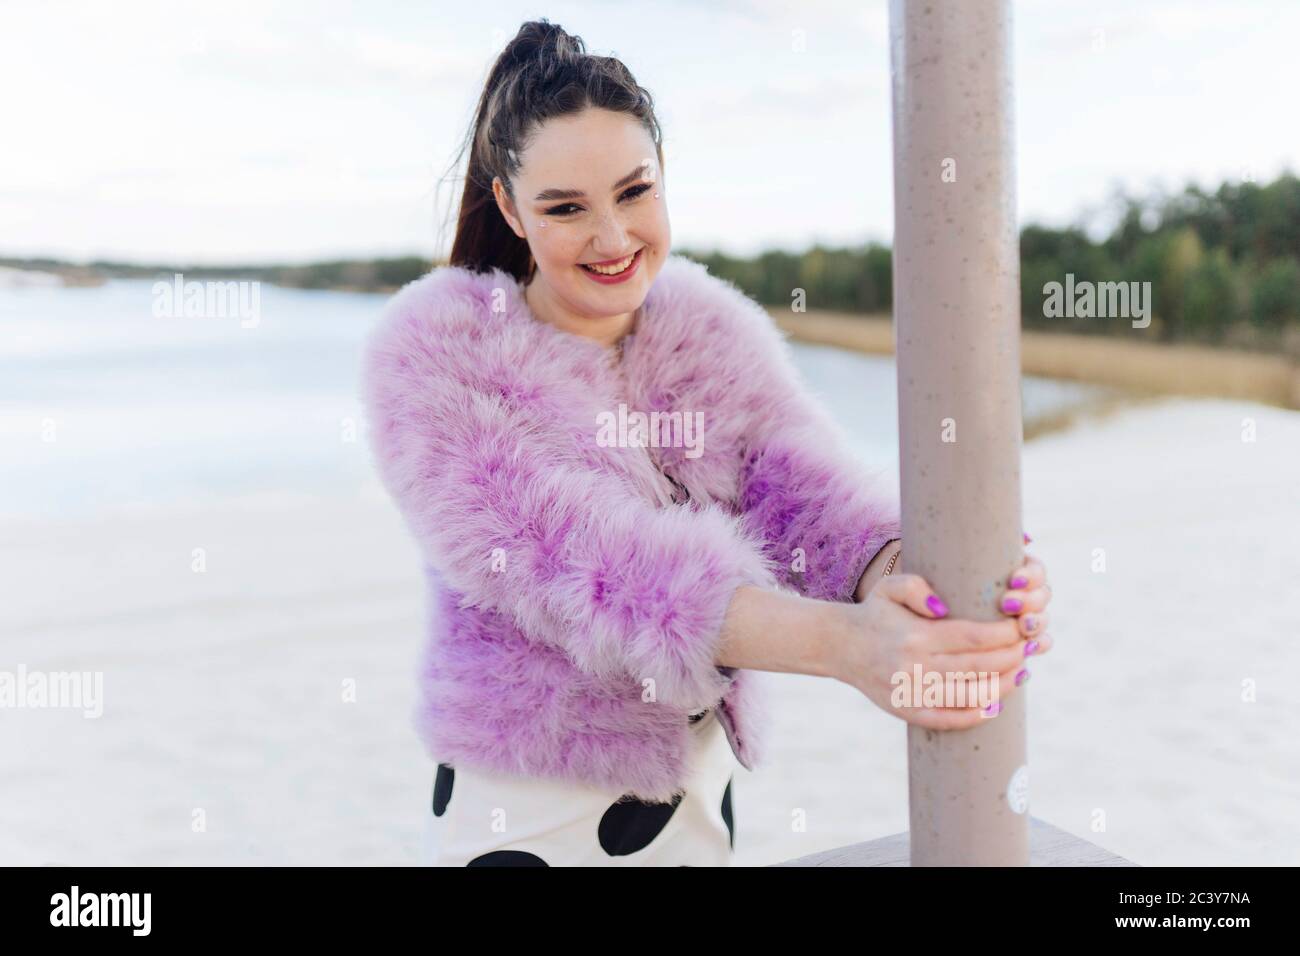 Belarus, Minsk, Portrait of young woman in pink cur coat on beach Stock Photo